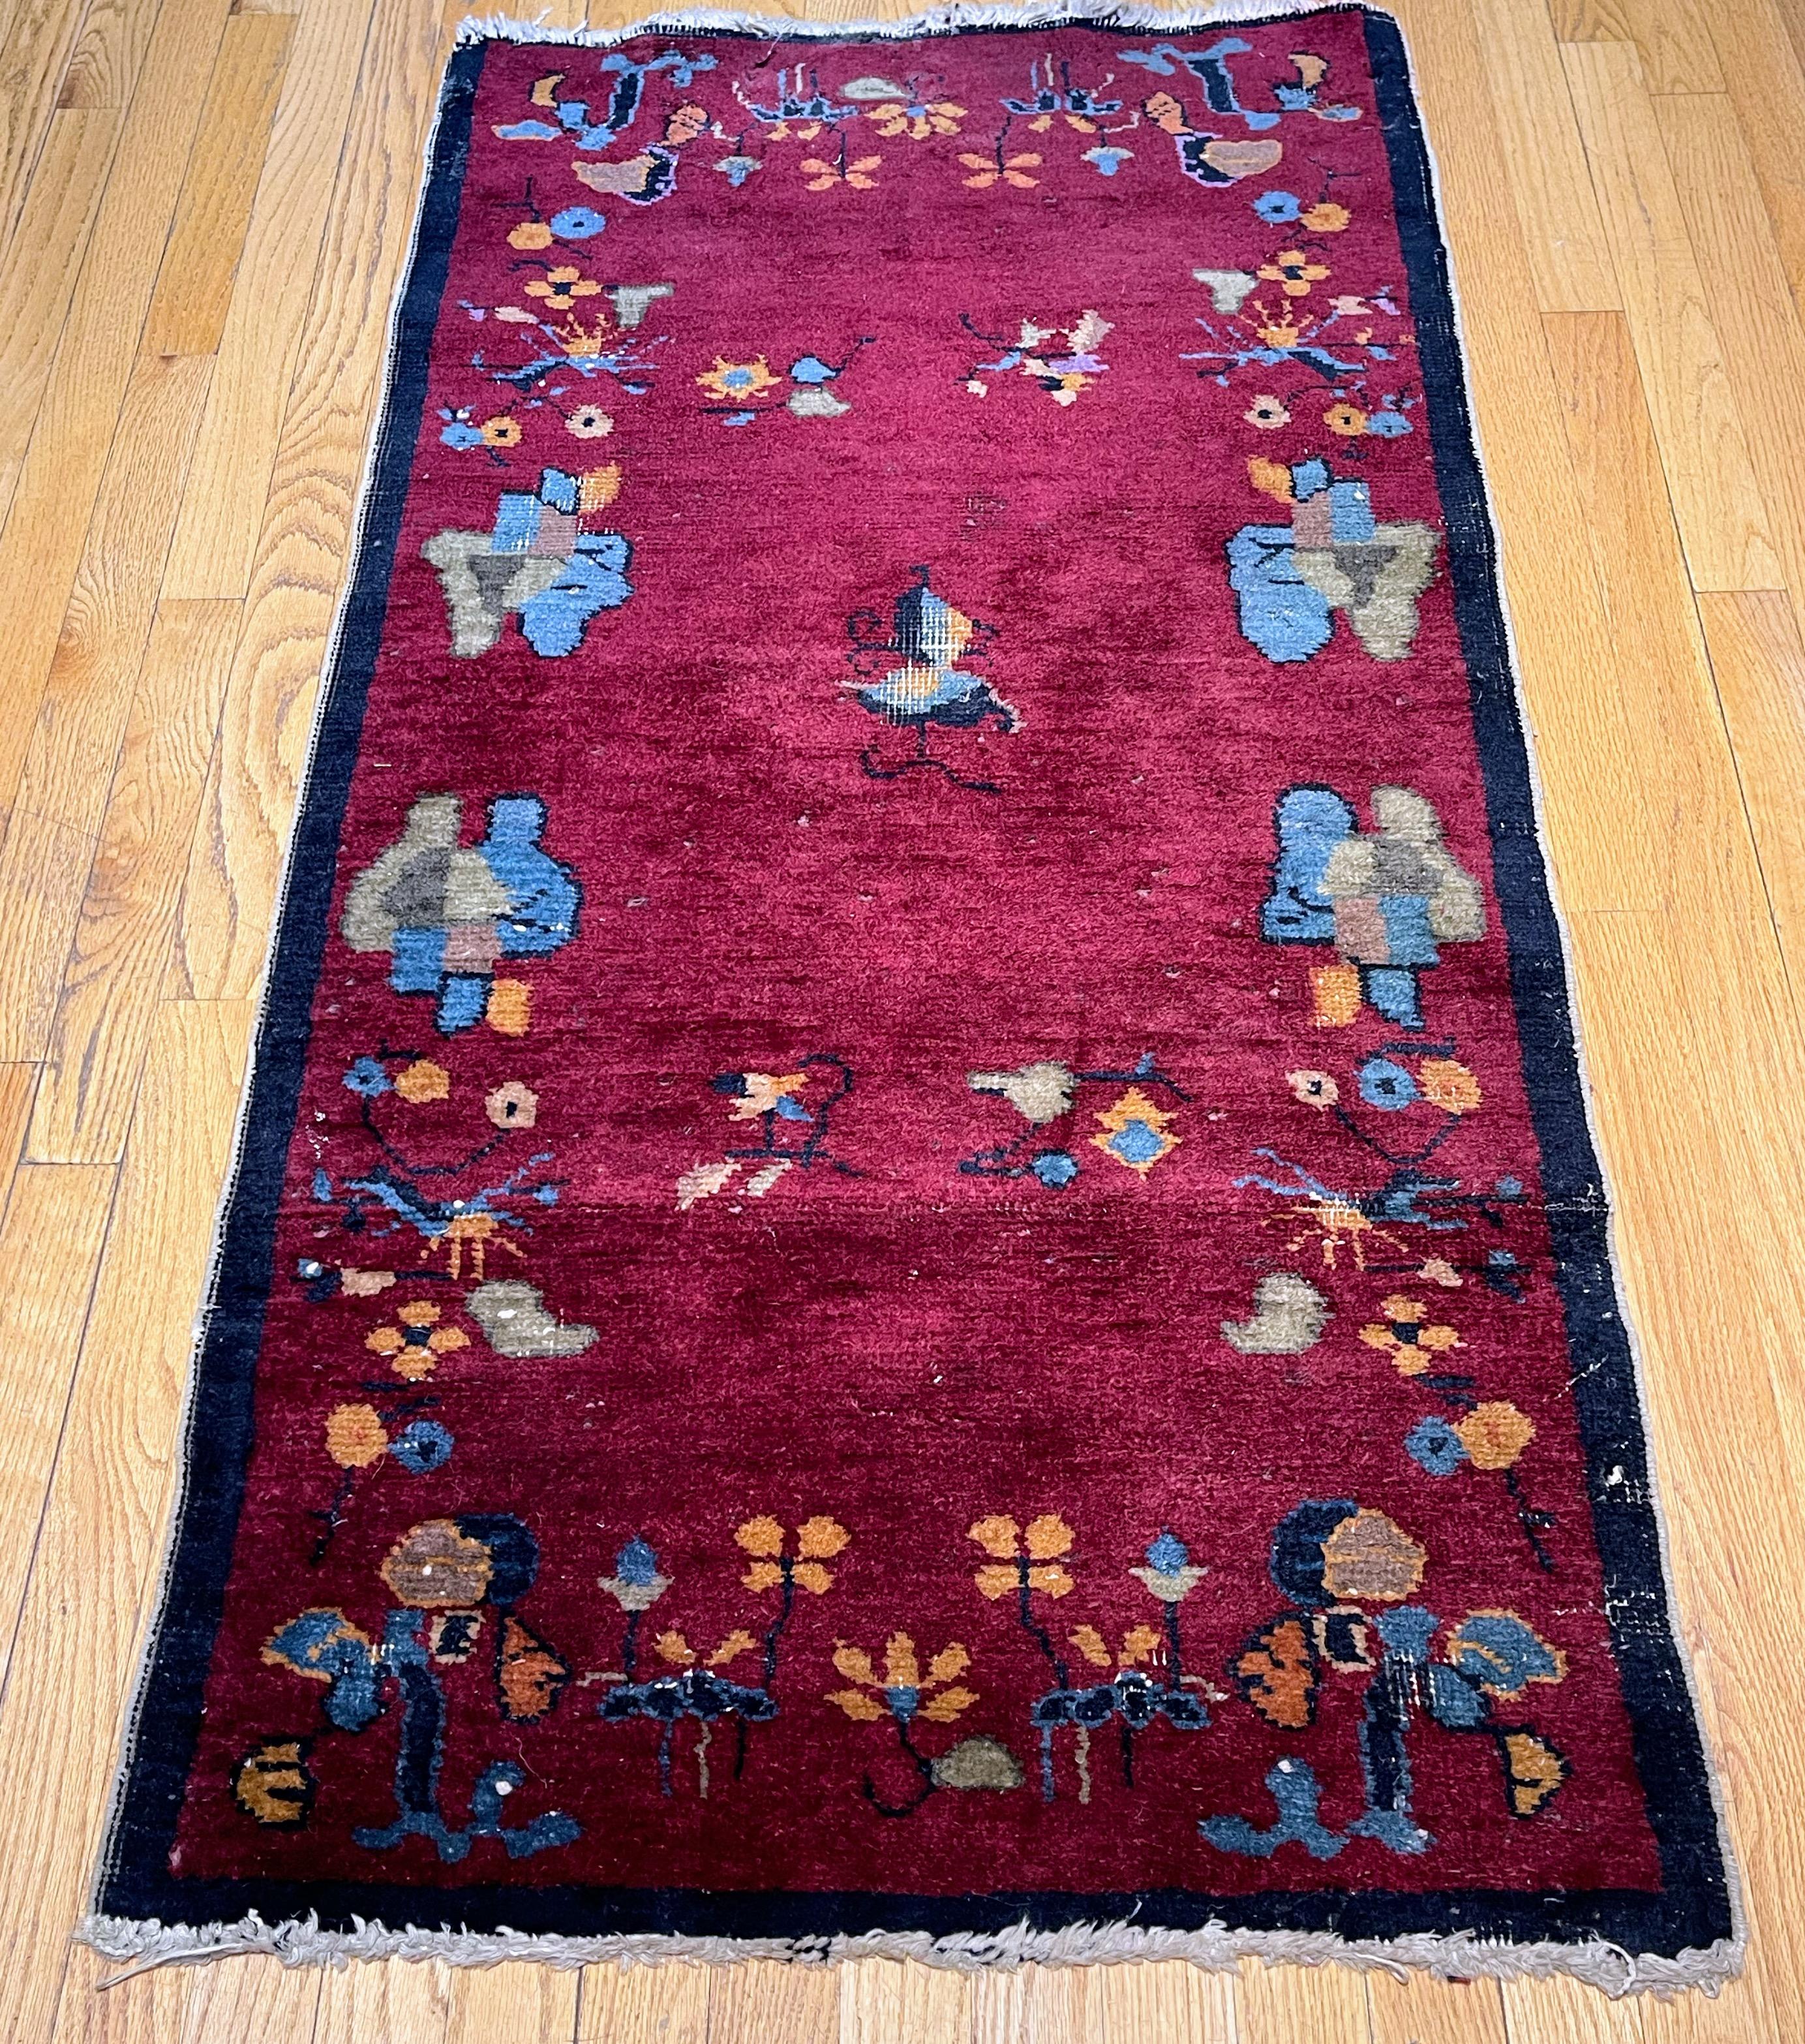 This rug was hand woven in China. With a maroon field and small border in indigo blue it is decorated with green, yellow and blue carnations. There are human figures, birds and animals in this very cute art deco rug. Wears in this rug are consistent